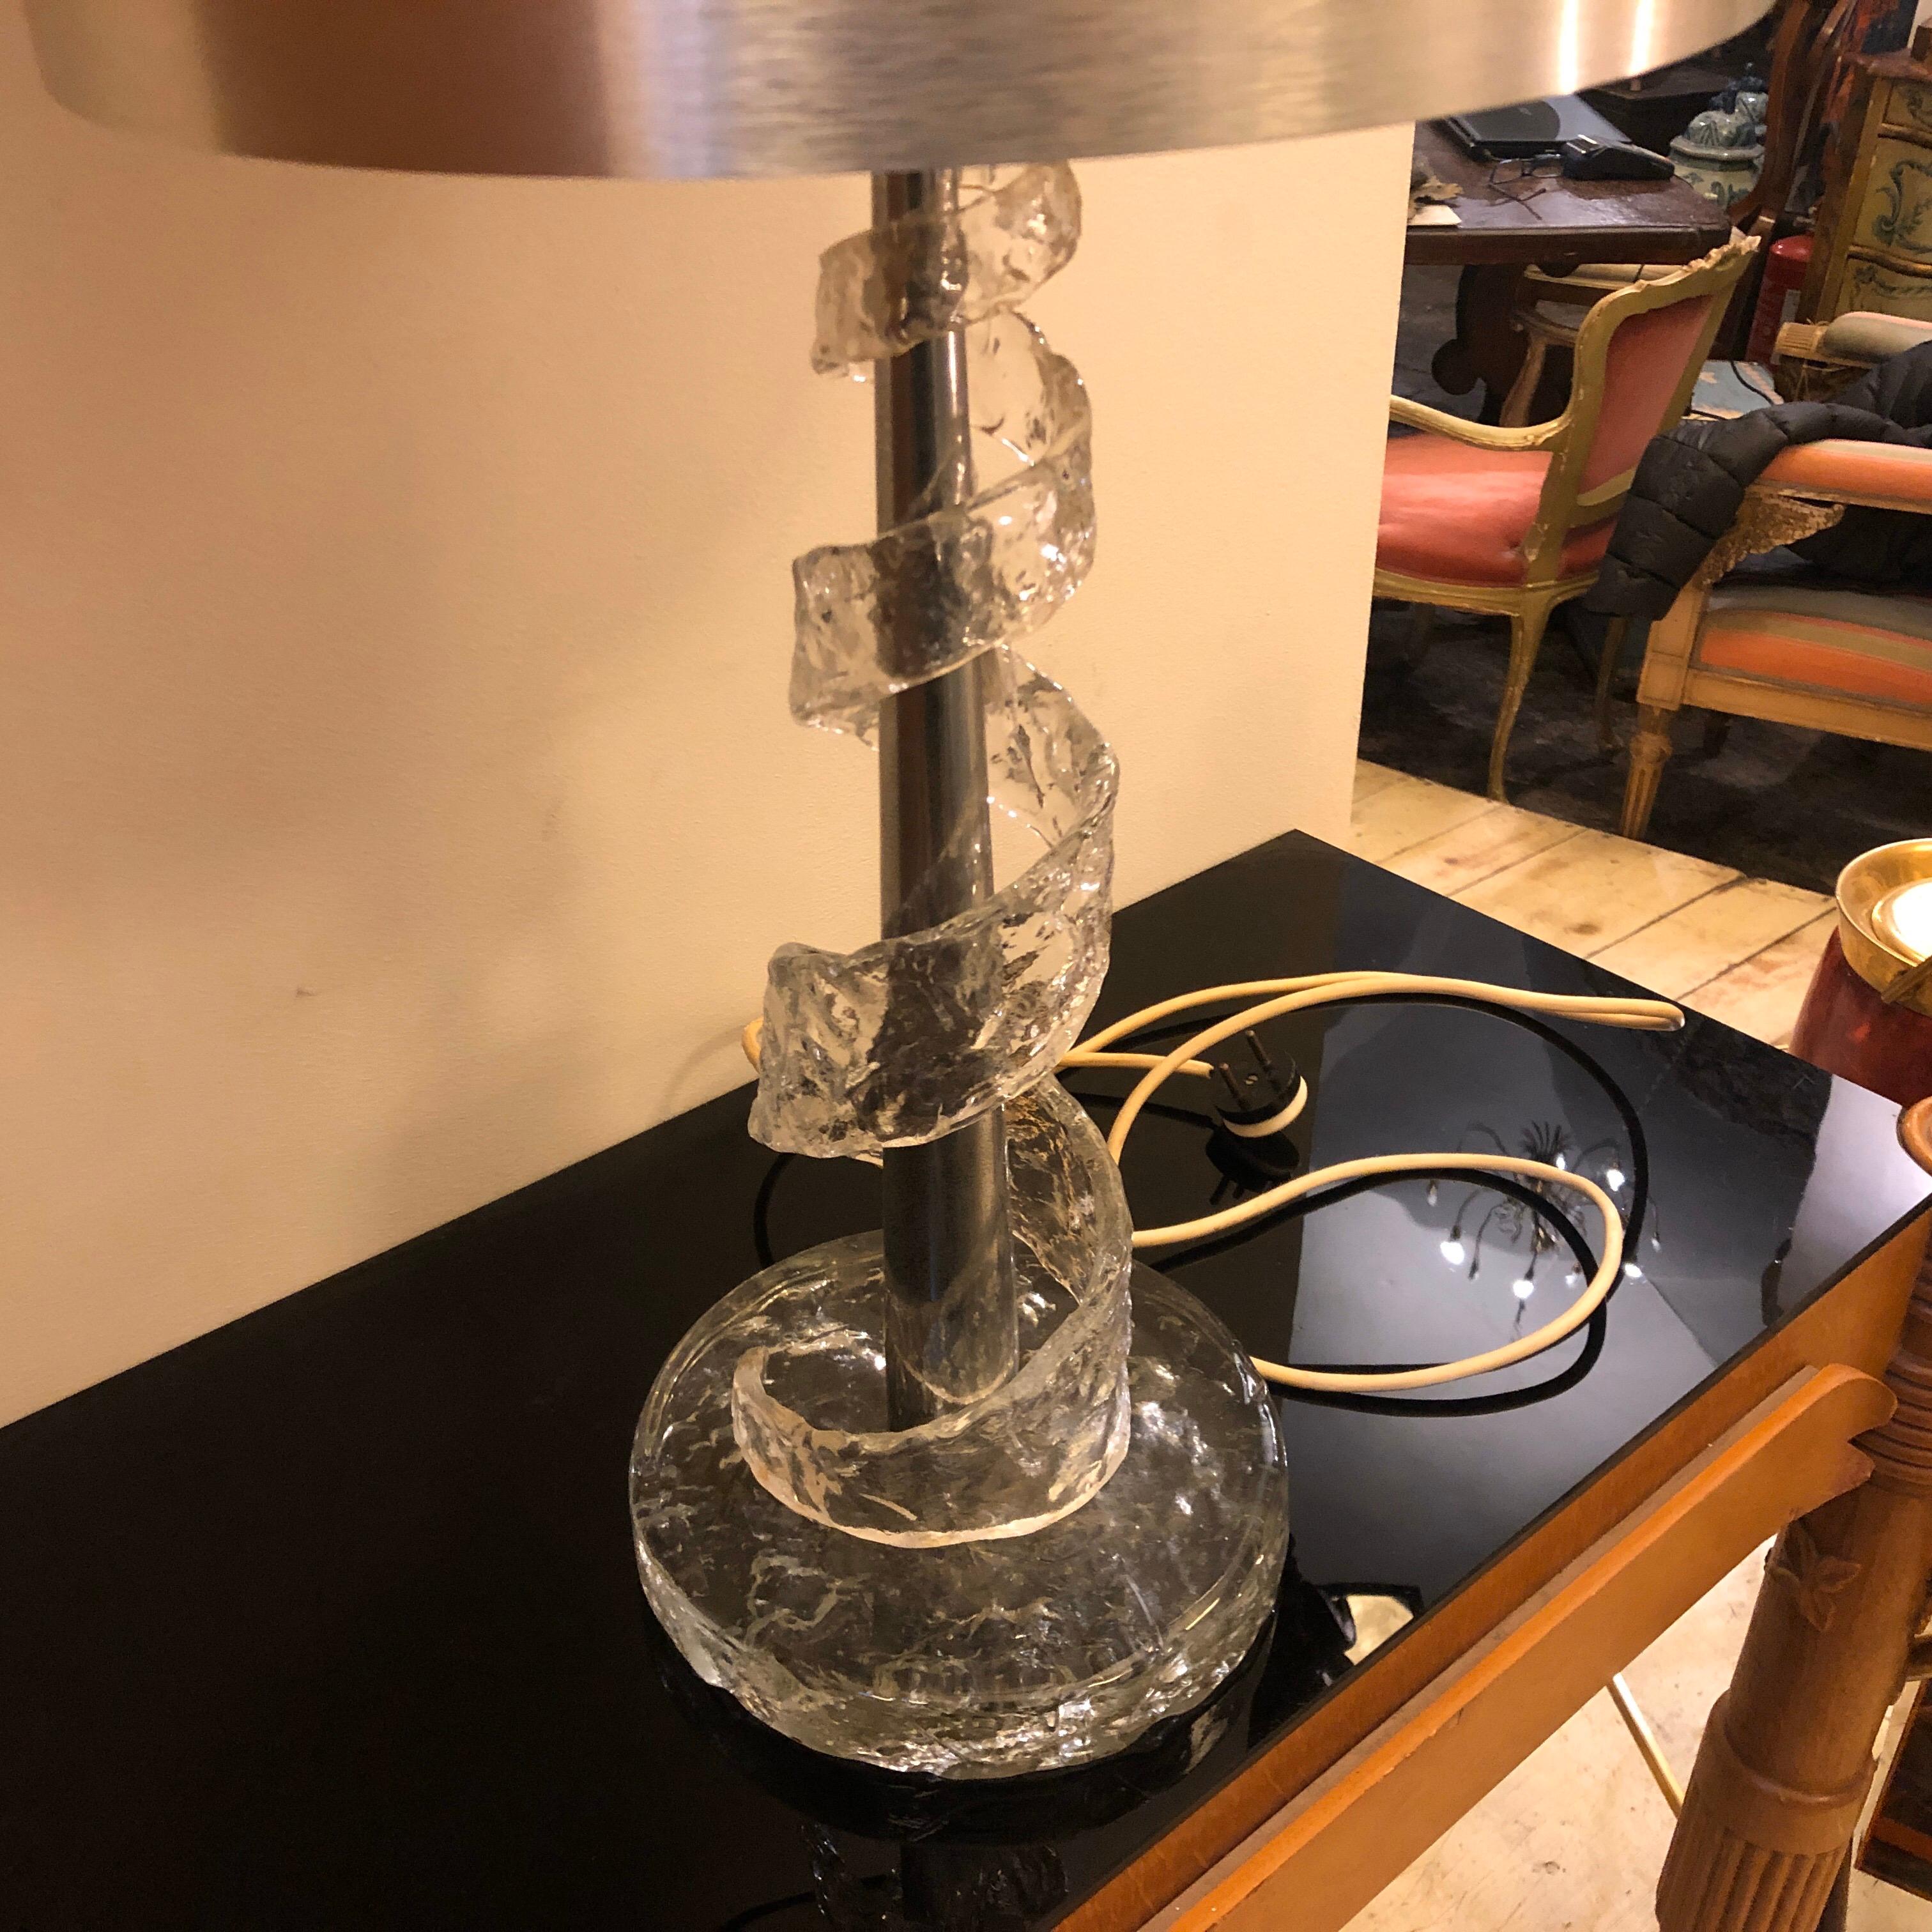 It's a particular Murano glass table lamp with original lampshade, it's made in two pieces, one is made of metal and glass, the spiral is made of transparent Murano glass. The table lamp has been designed by Angelo Brotto and manufactured by